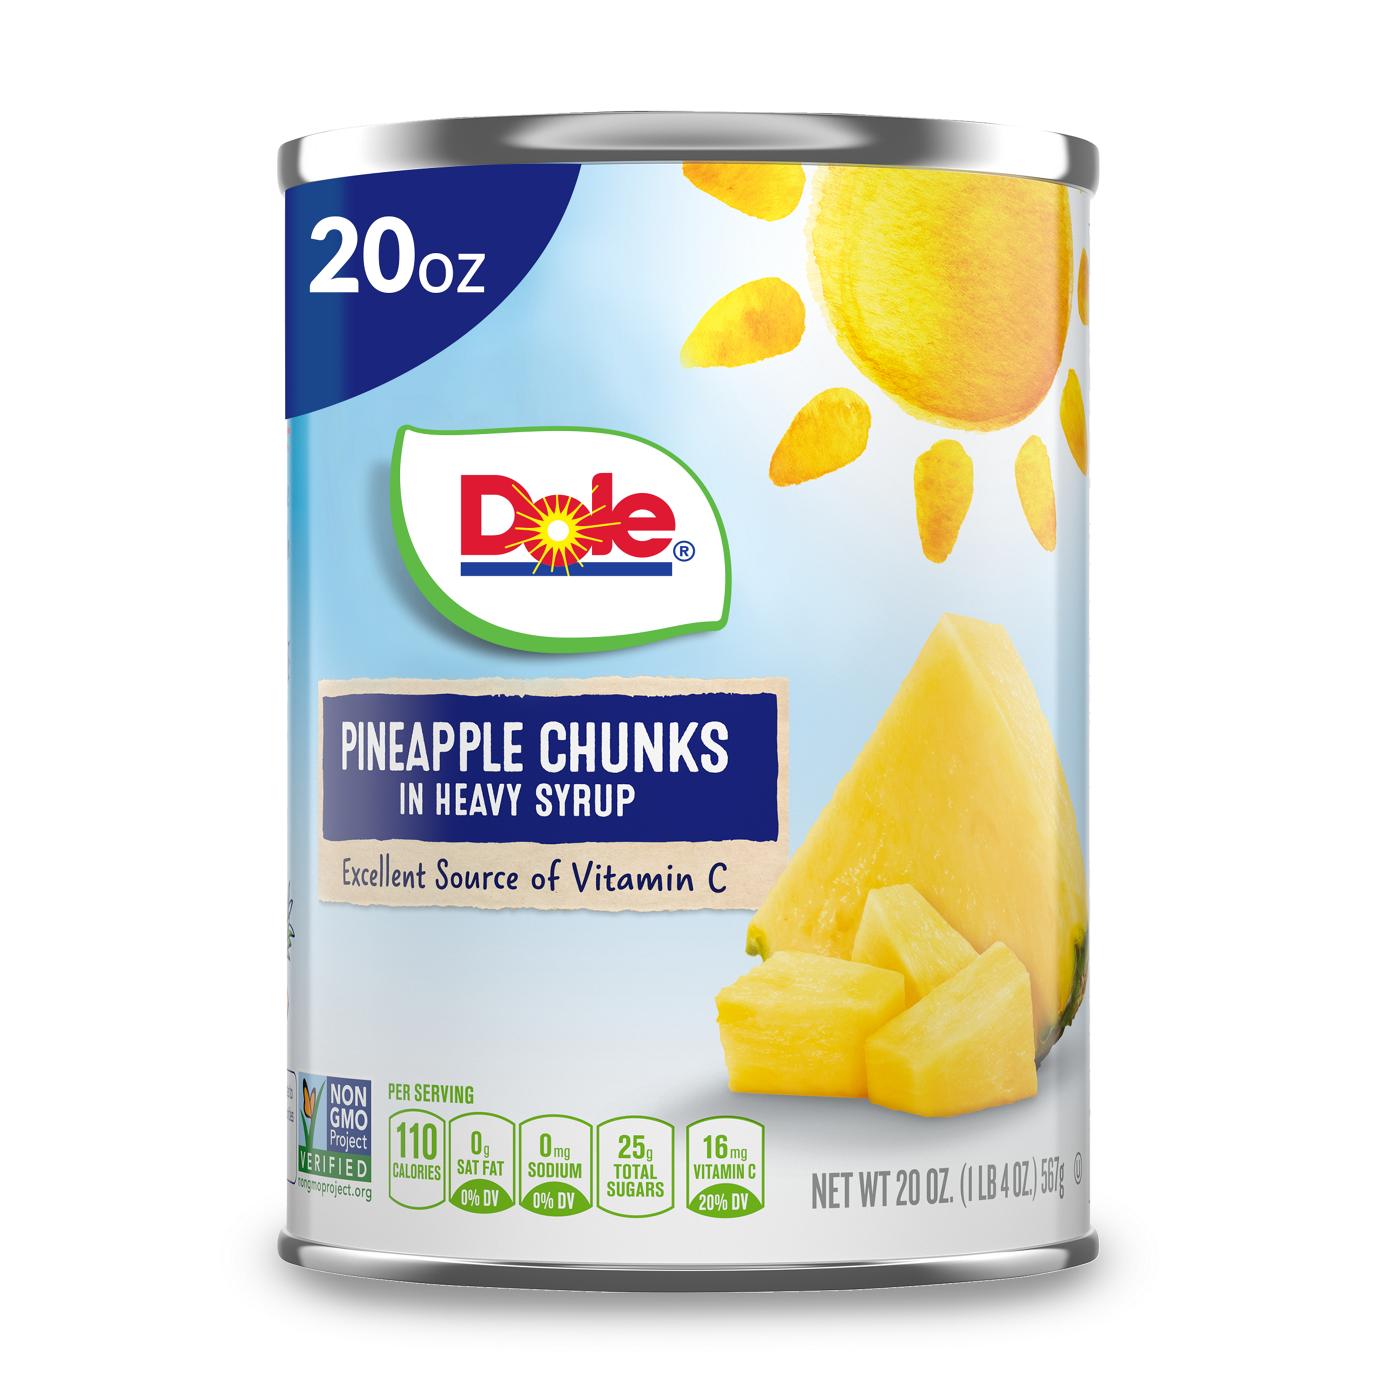 Dole Pineapple Chunks in Heavy Syrup; image 1 of 5